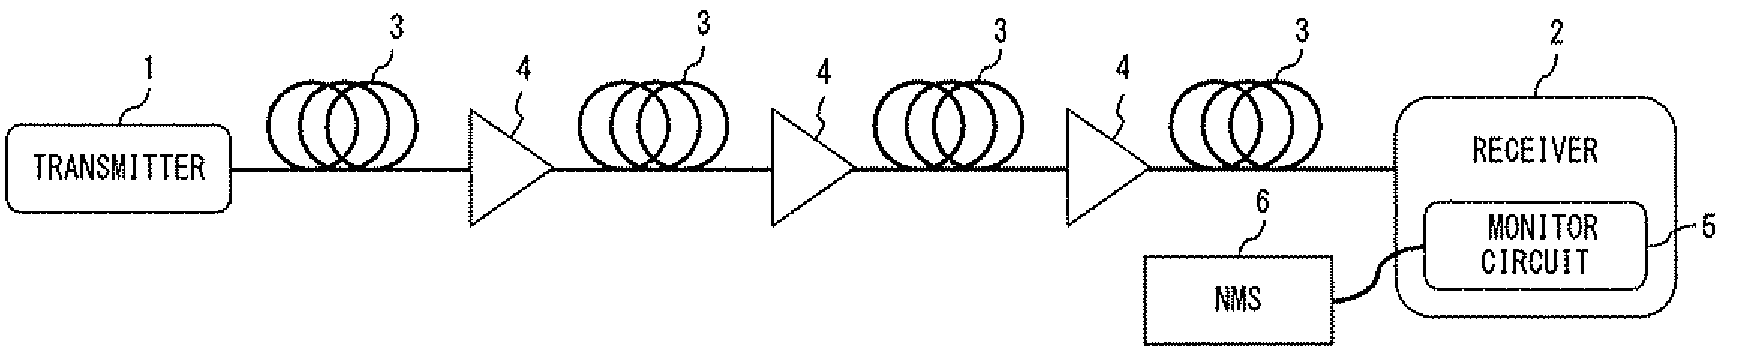 Monitor circuit for monitoring property of optical fiber transmission line and quality of optical signal